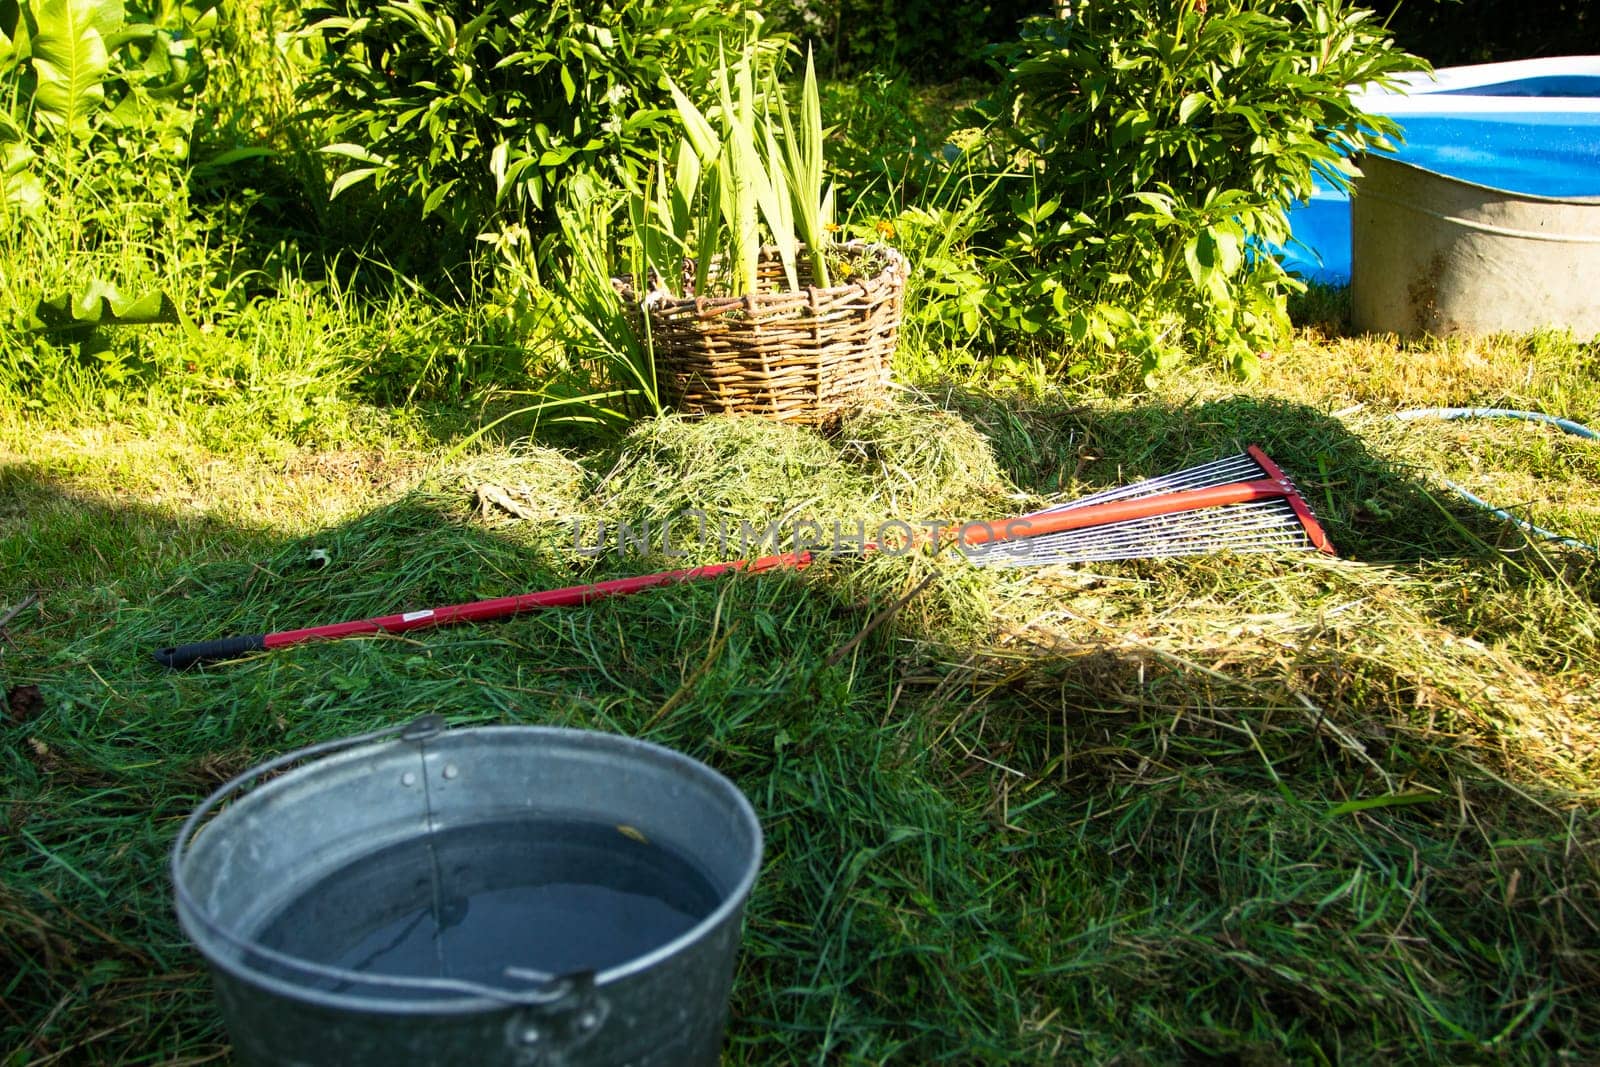 Aluminum bucket with water and red rake. House cleaning. Grass mowing. Natural farming.